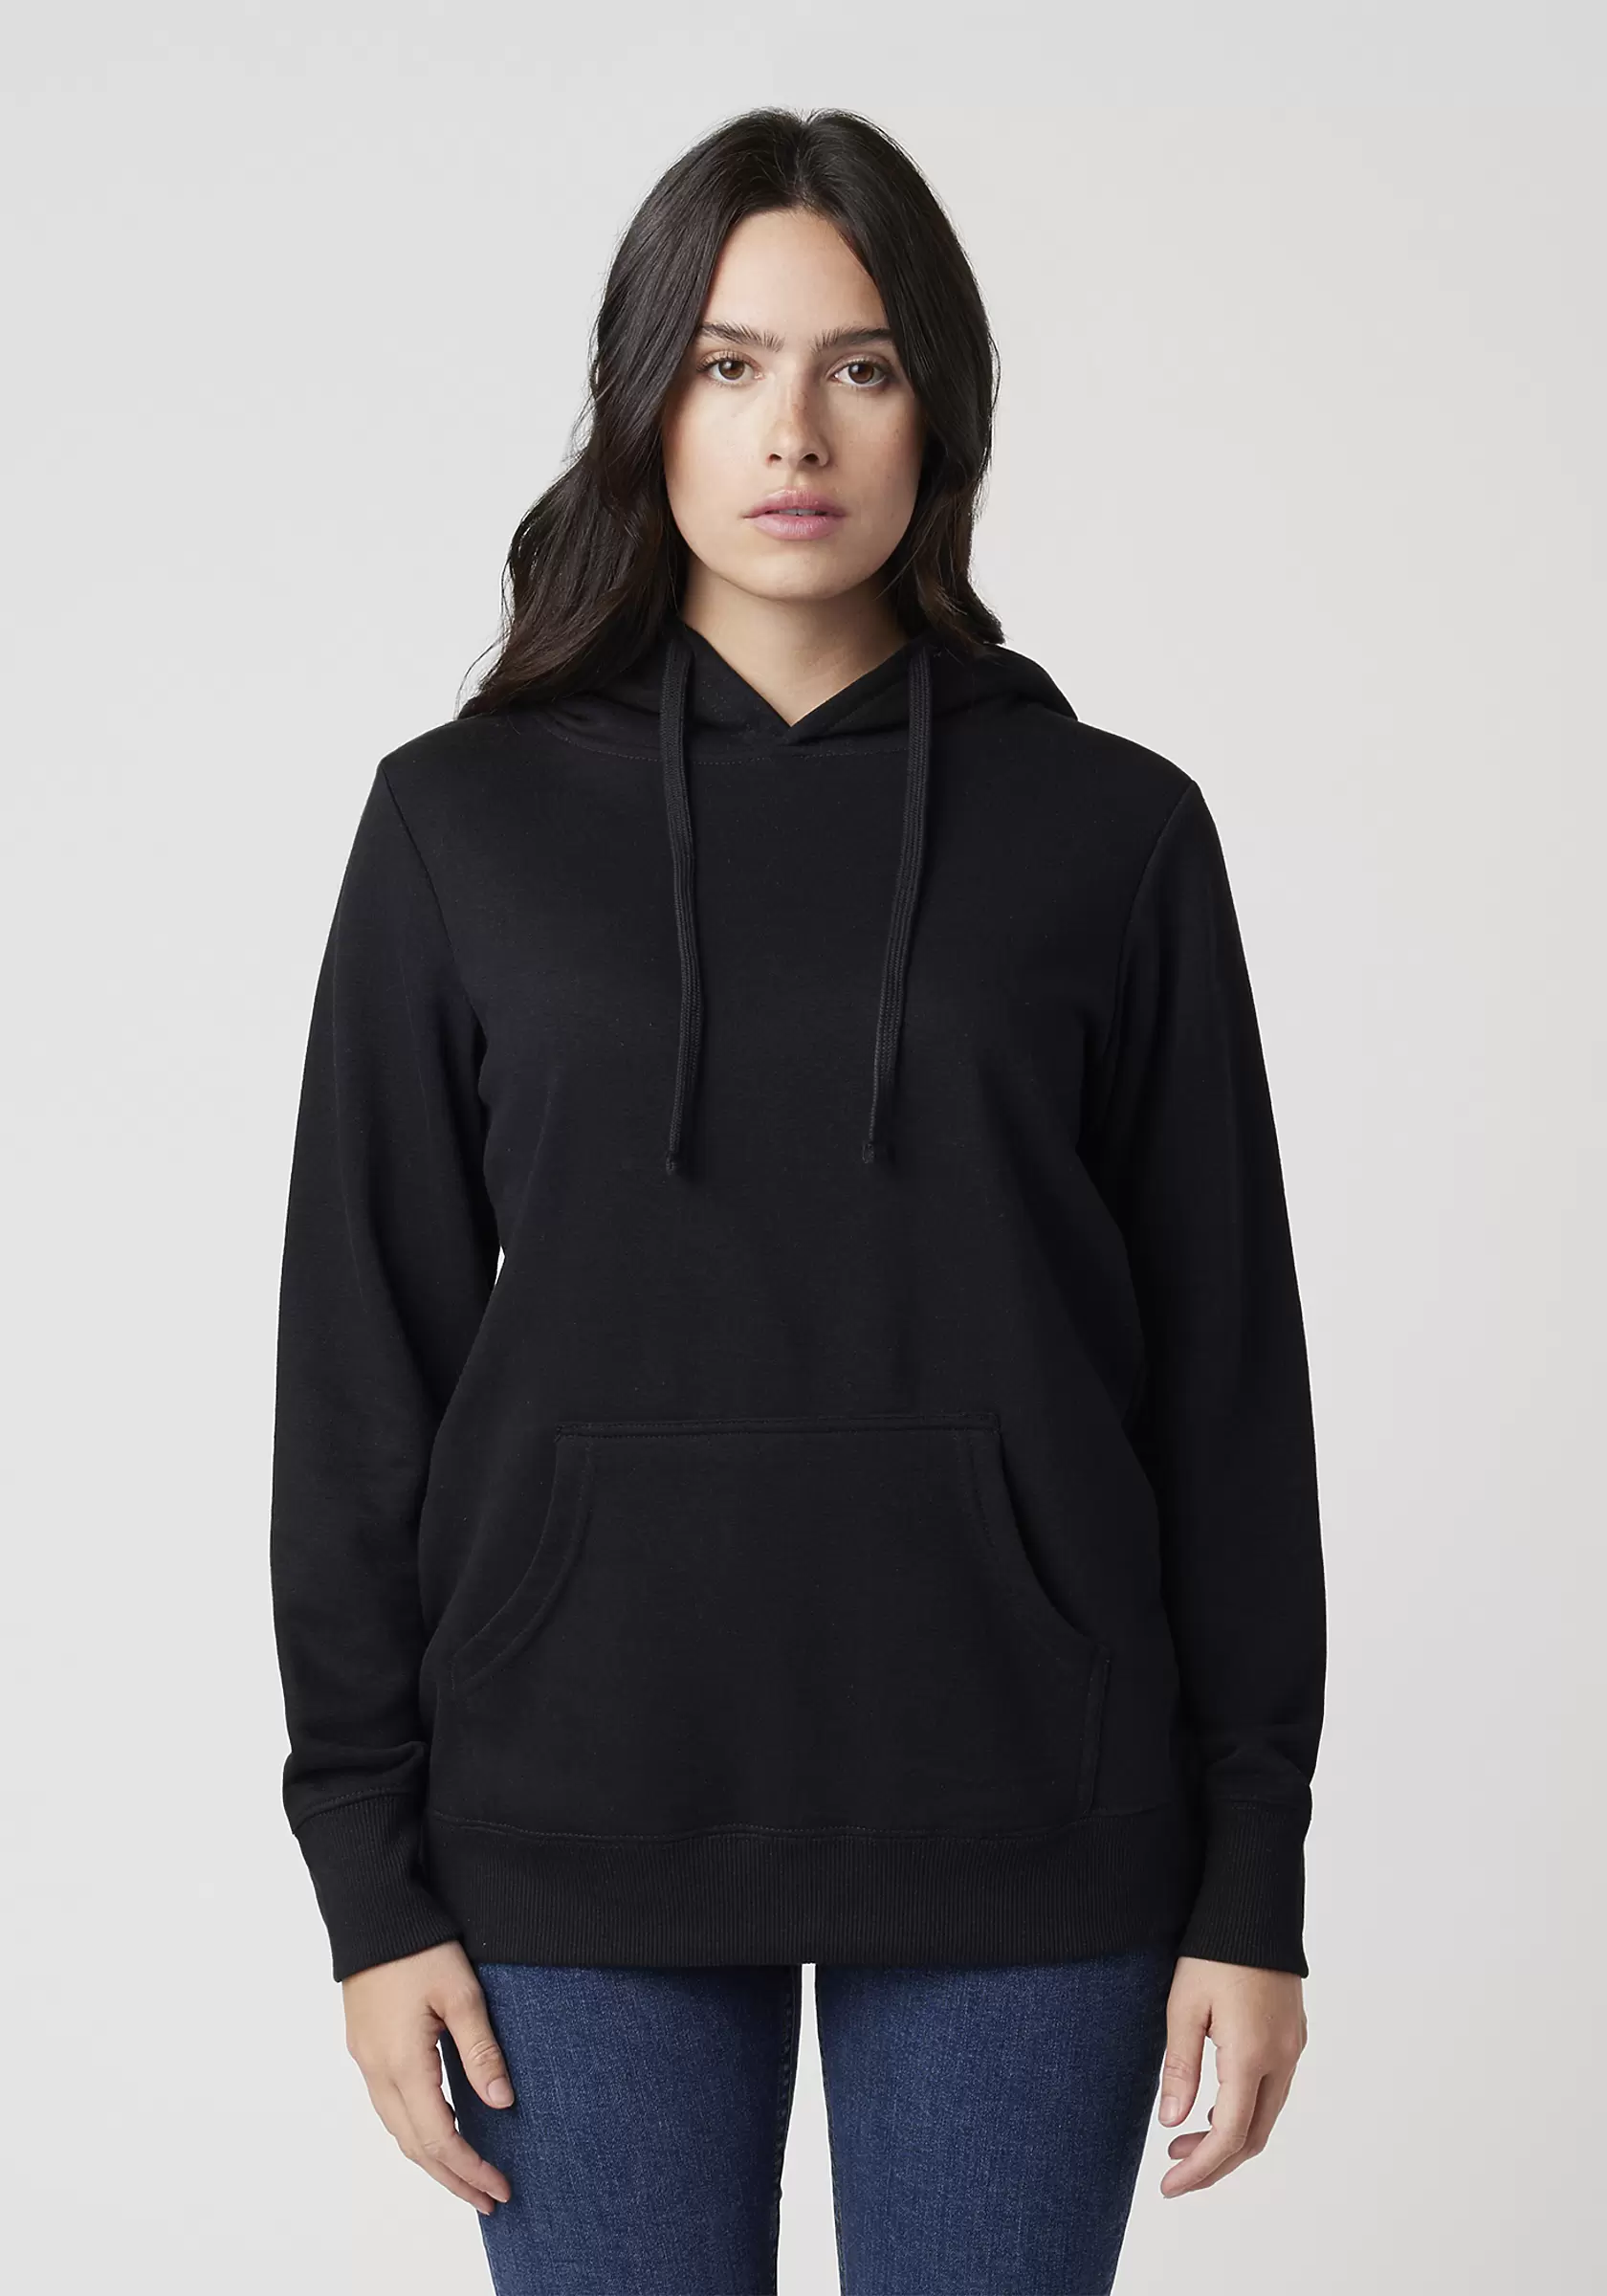 Cotton Heritage W2280 WOMEN'S FRENCH TERRY HOODIE Black - From $14.24